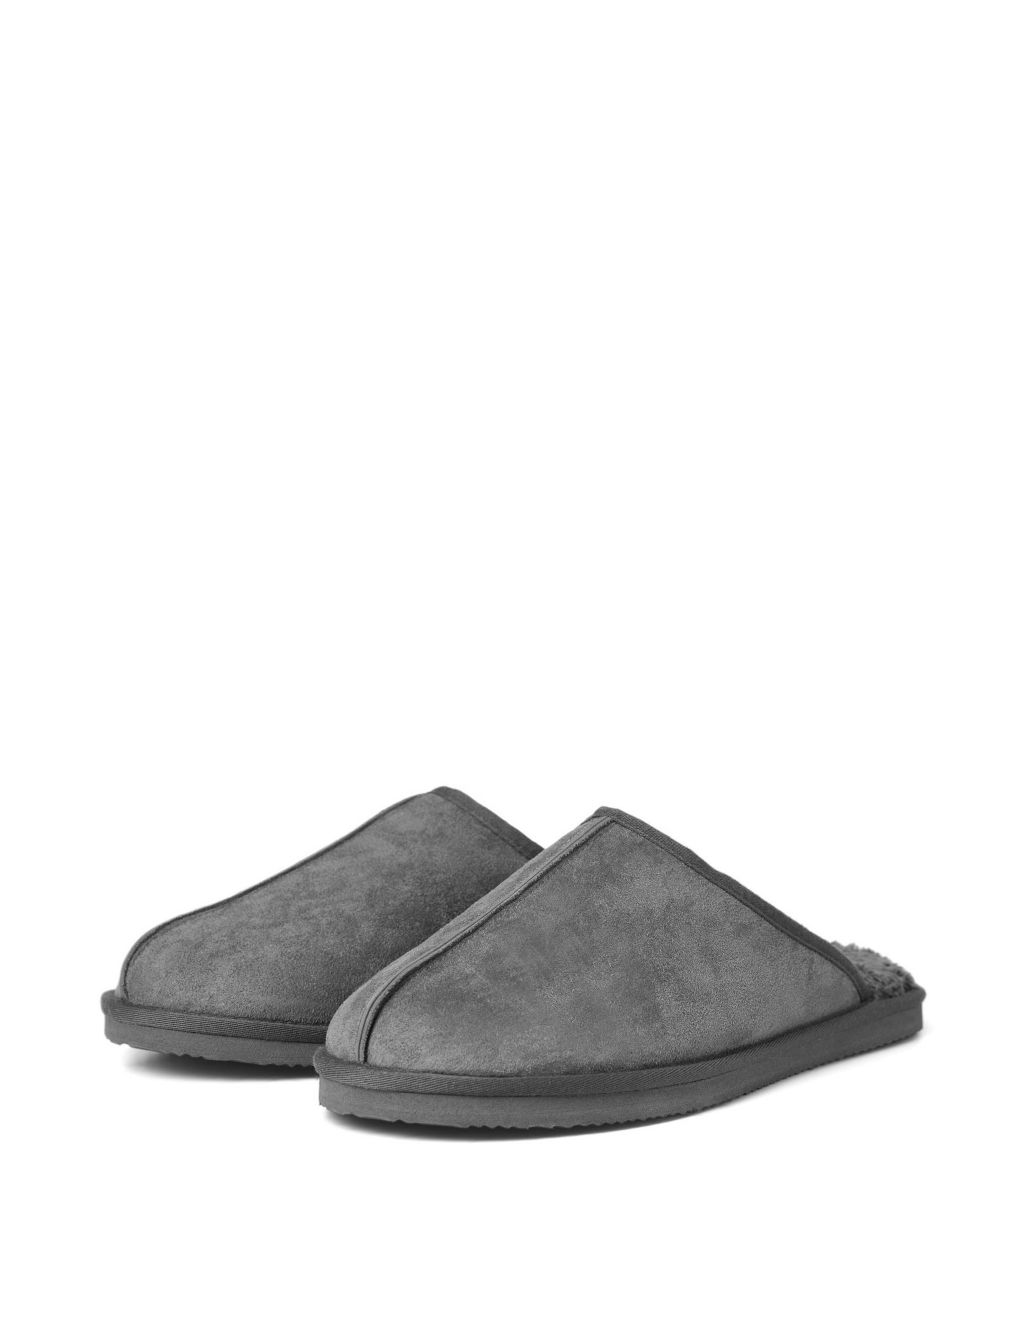 Page 2 - Men’s Slippers | M&S